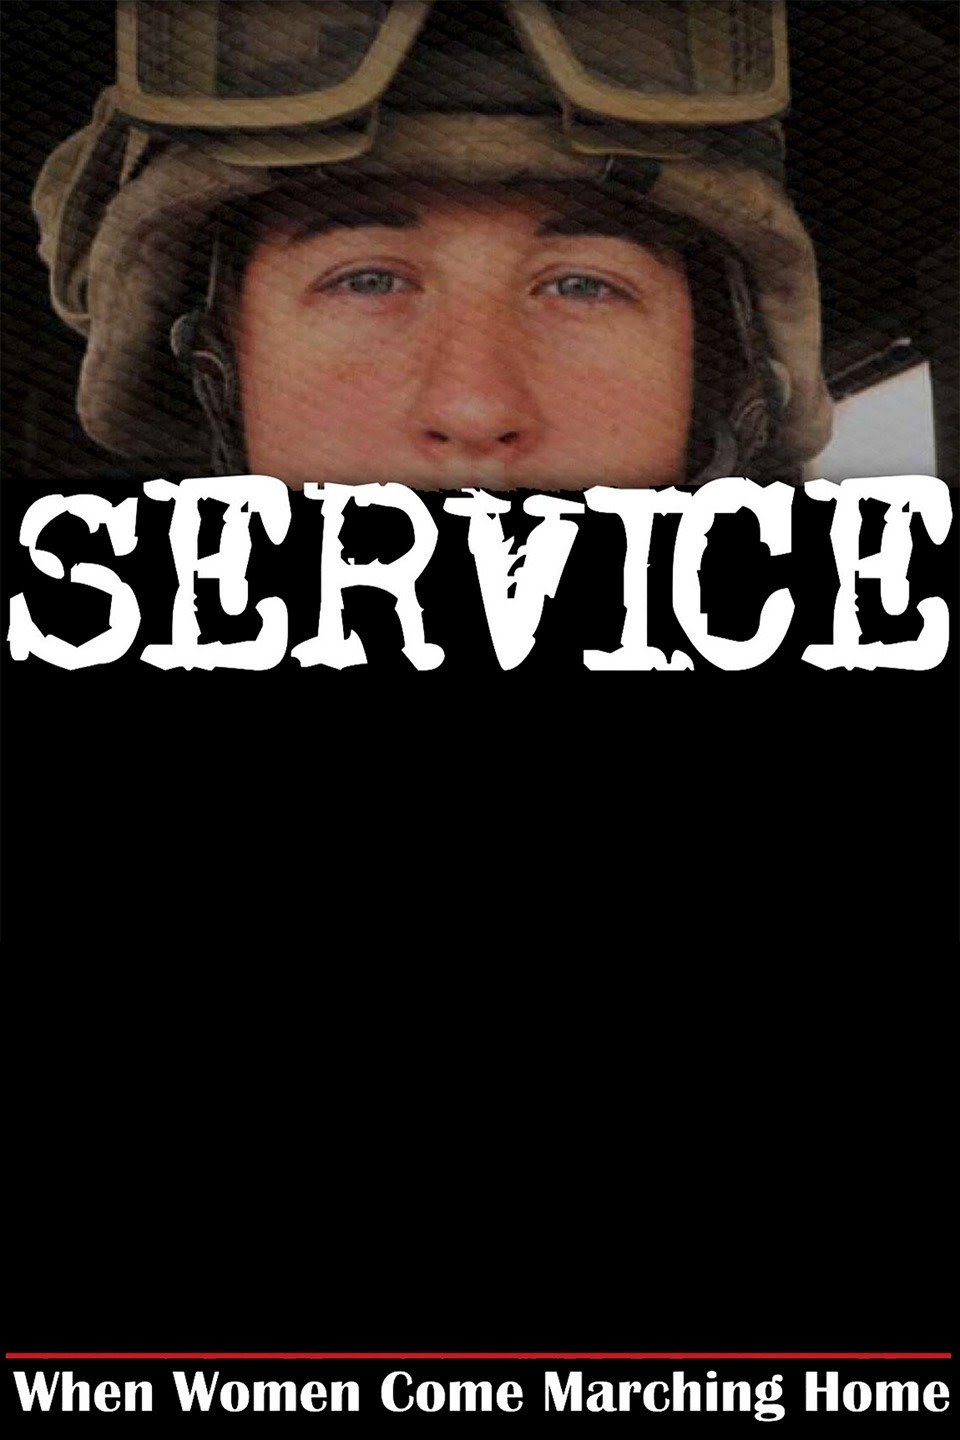 Service documentary poster